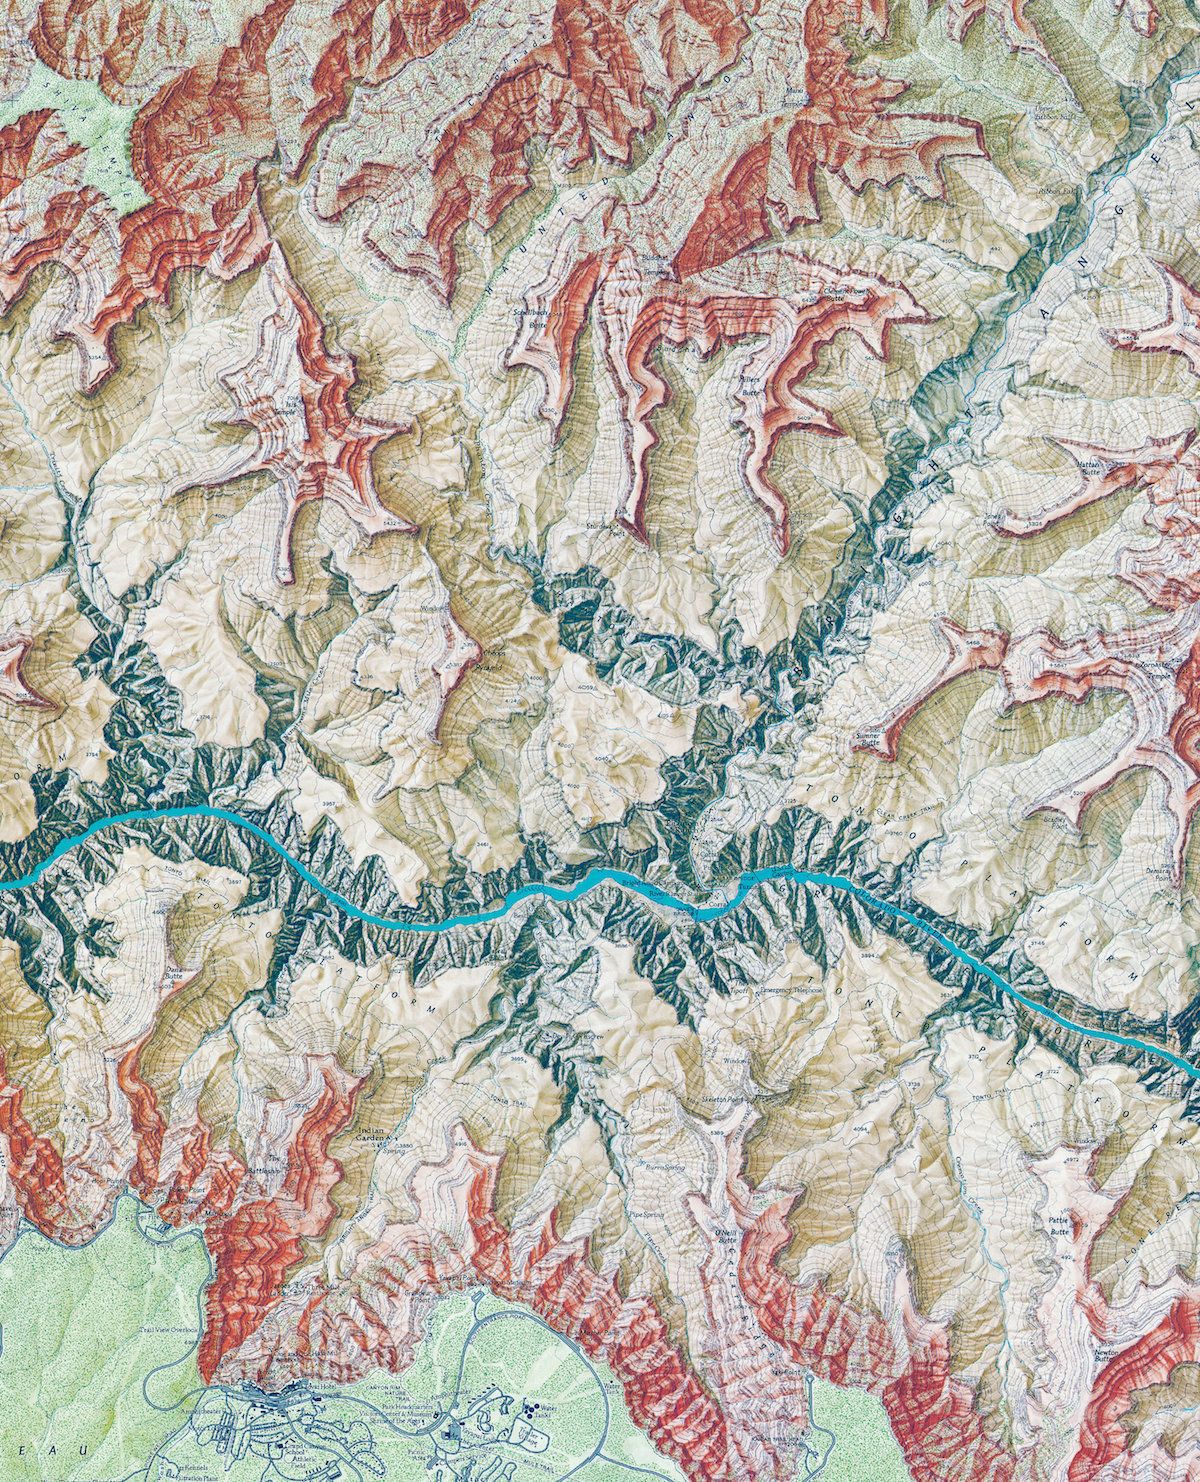 36.0574° N, 112.1428° W, William T. Peele, Richard K. Rogers, Bradford Washburn, Tibor G. Tóth, "The Heart of the Grand Canyon," 1978. Making this classic map of the Grand Canyon required 146 days of field work over four years, including climbing, exploration, close to 700 helicopter flights and use of a laser beam.